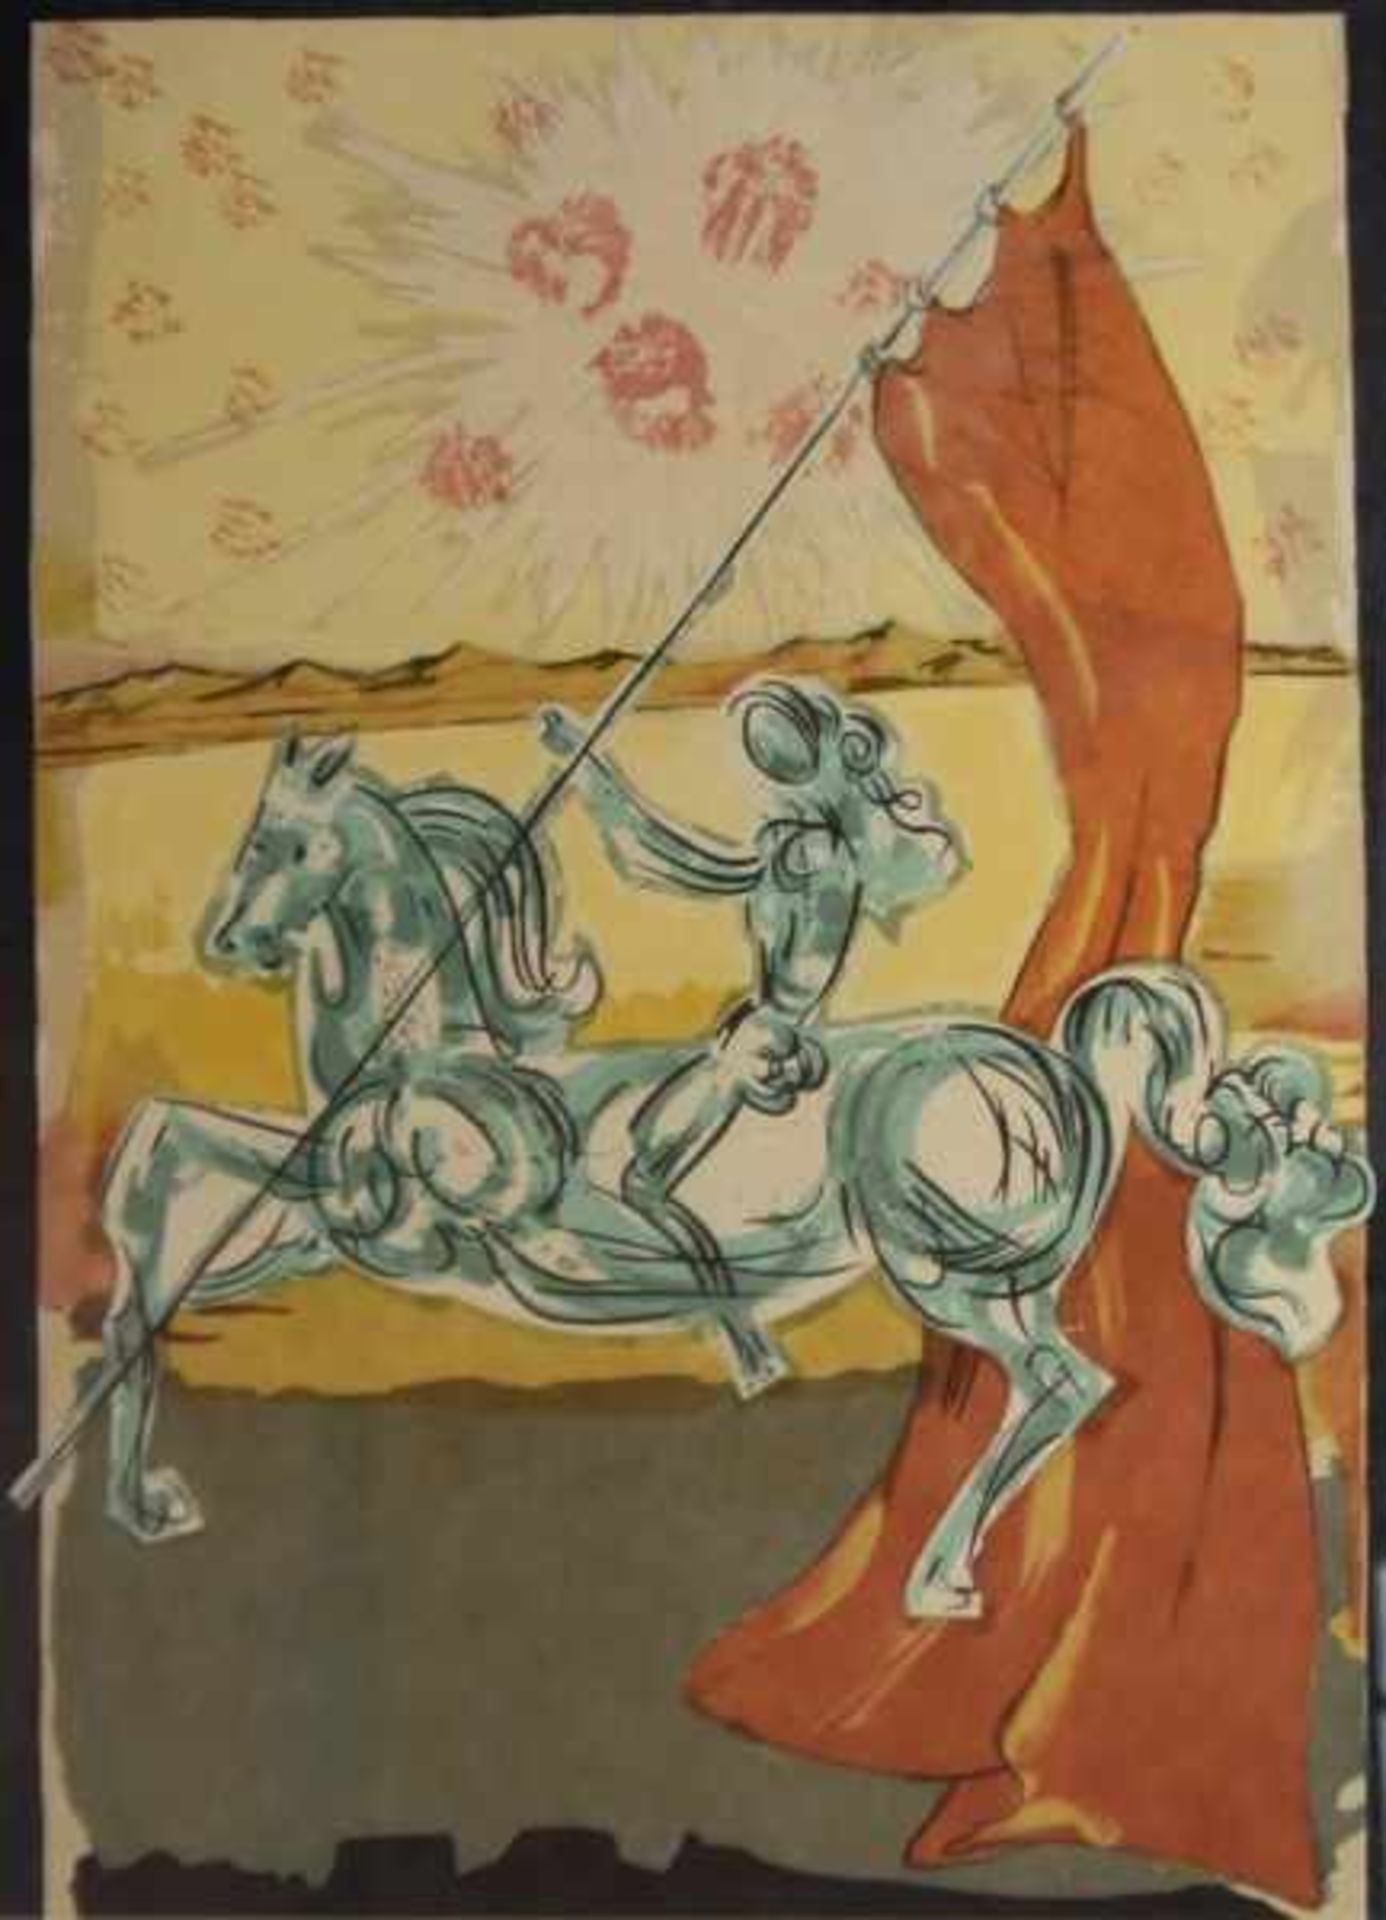 DALI Salvadore (1904-1989 Figueres) "Reiterin mit Fahne", wohl Jeanne D'Arc, Farblithographie, - Image 2 of 5